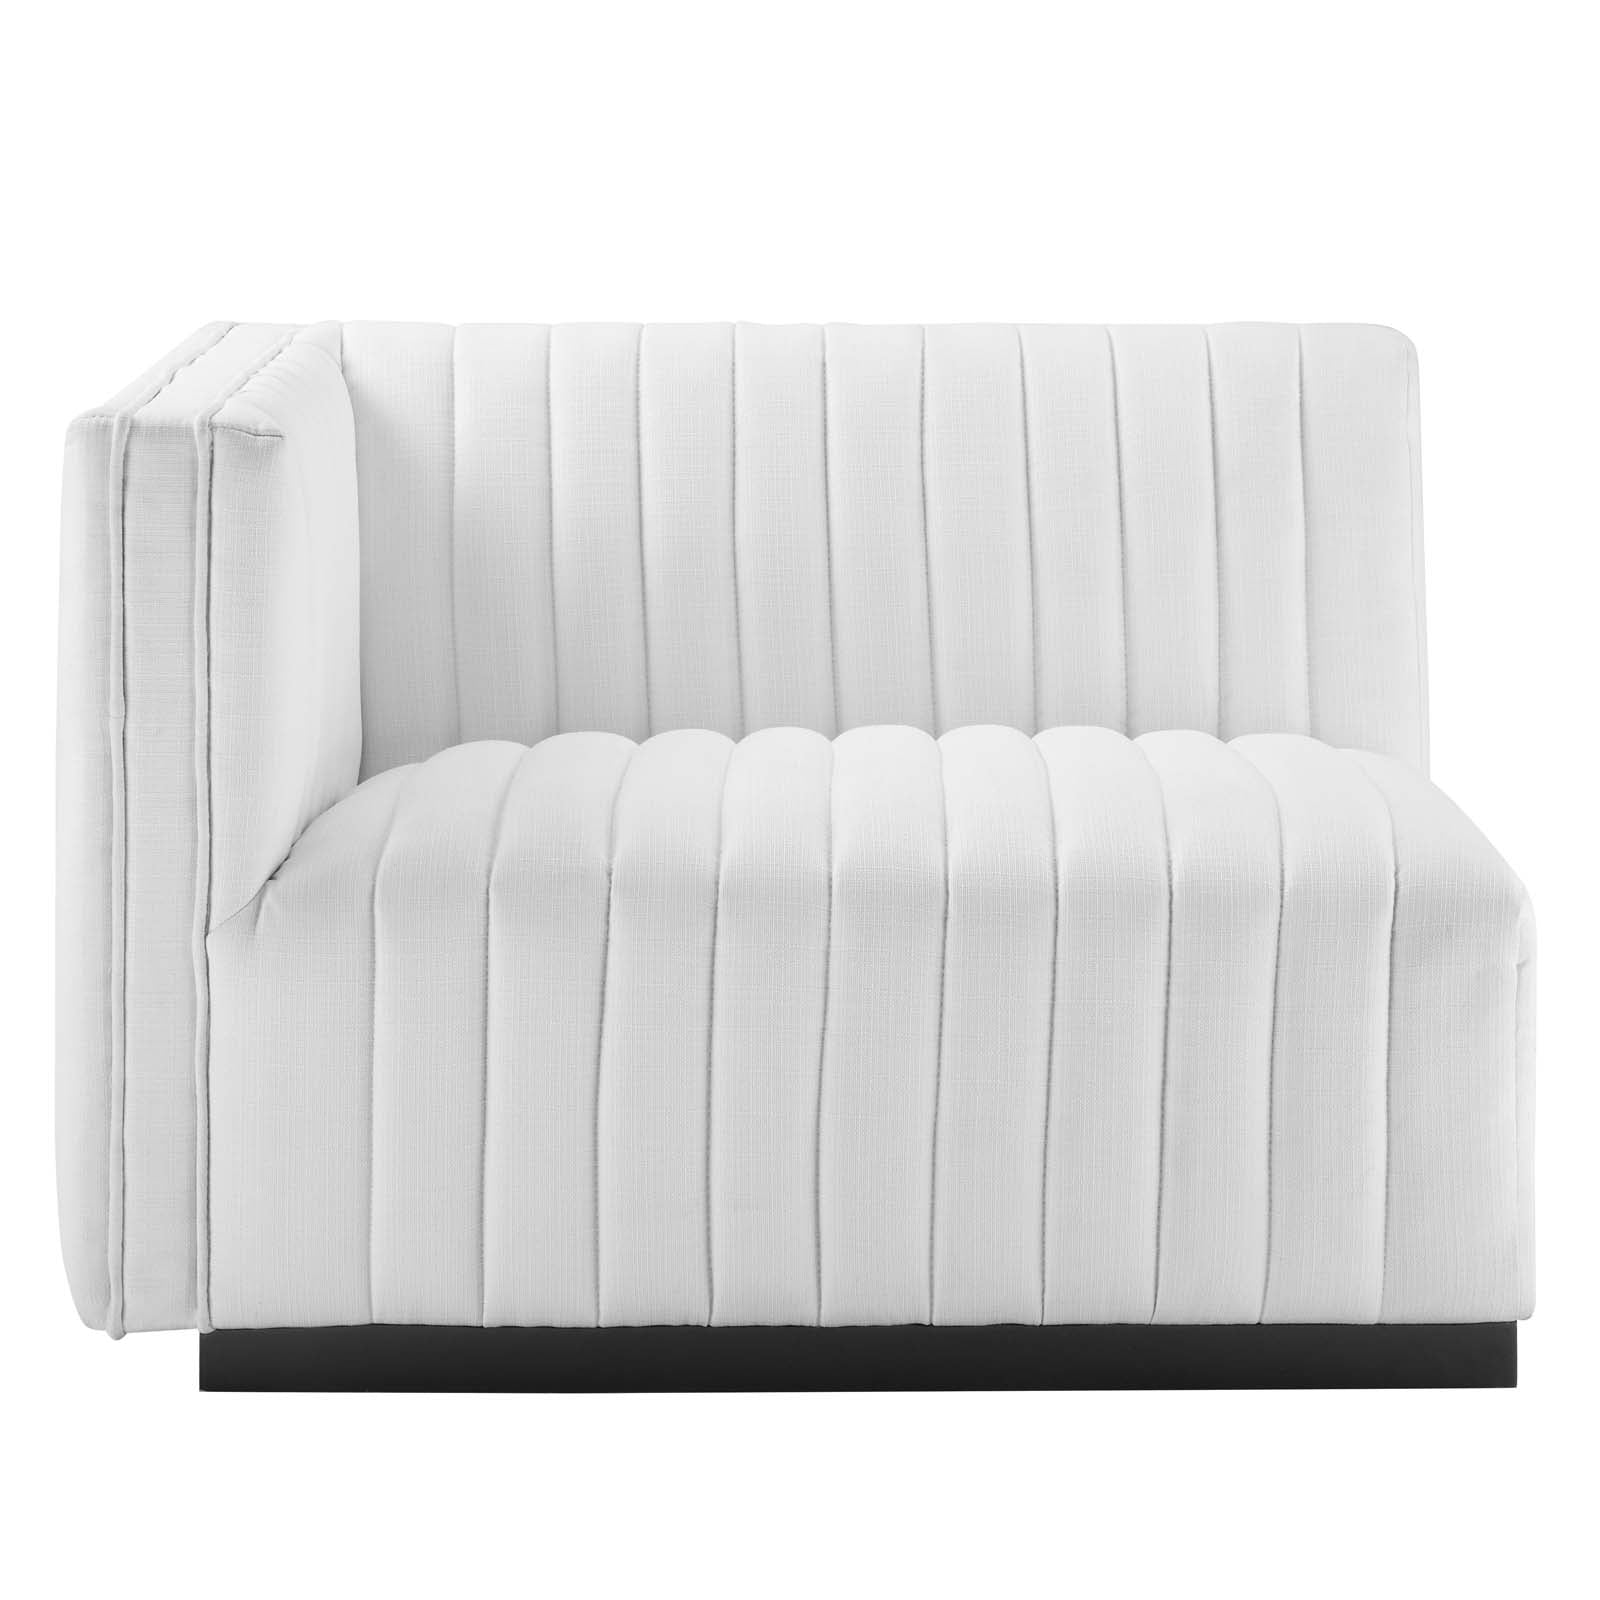 Modway Sectional Sofas - Conjure Channel Tufted Upholstered Fabric 5-Piece L-Shaped Sectional Black White